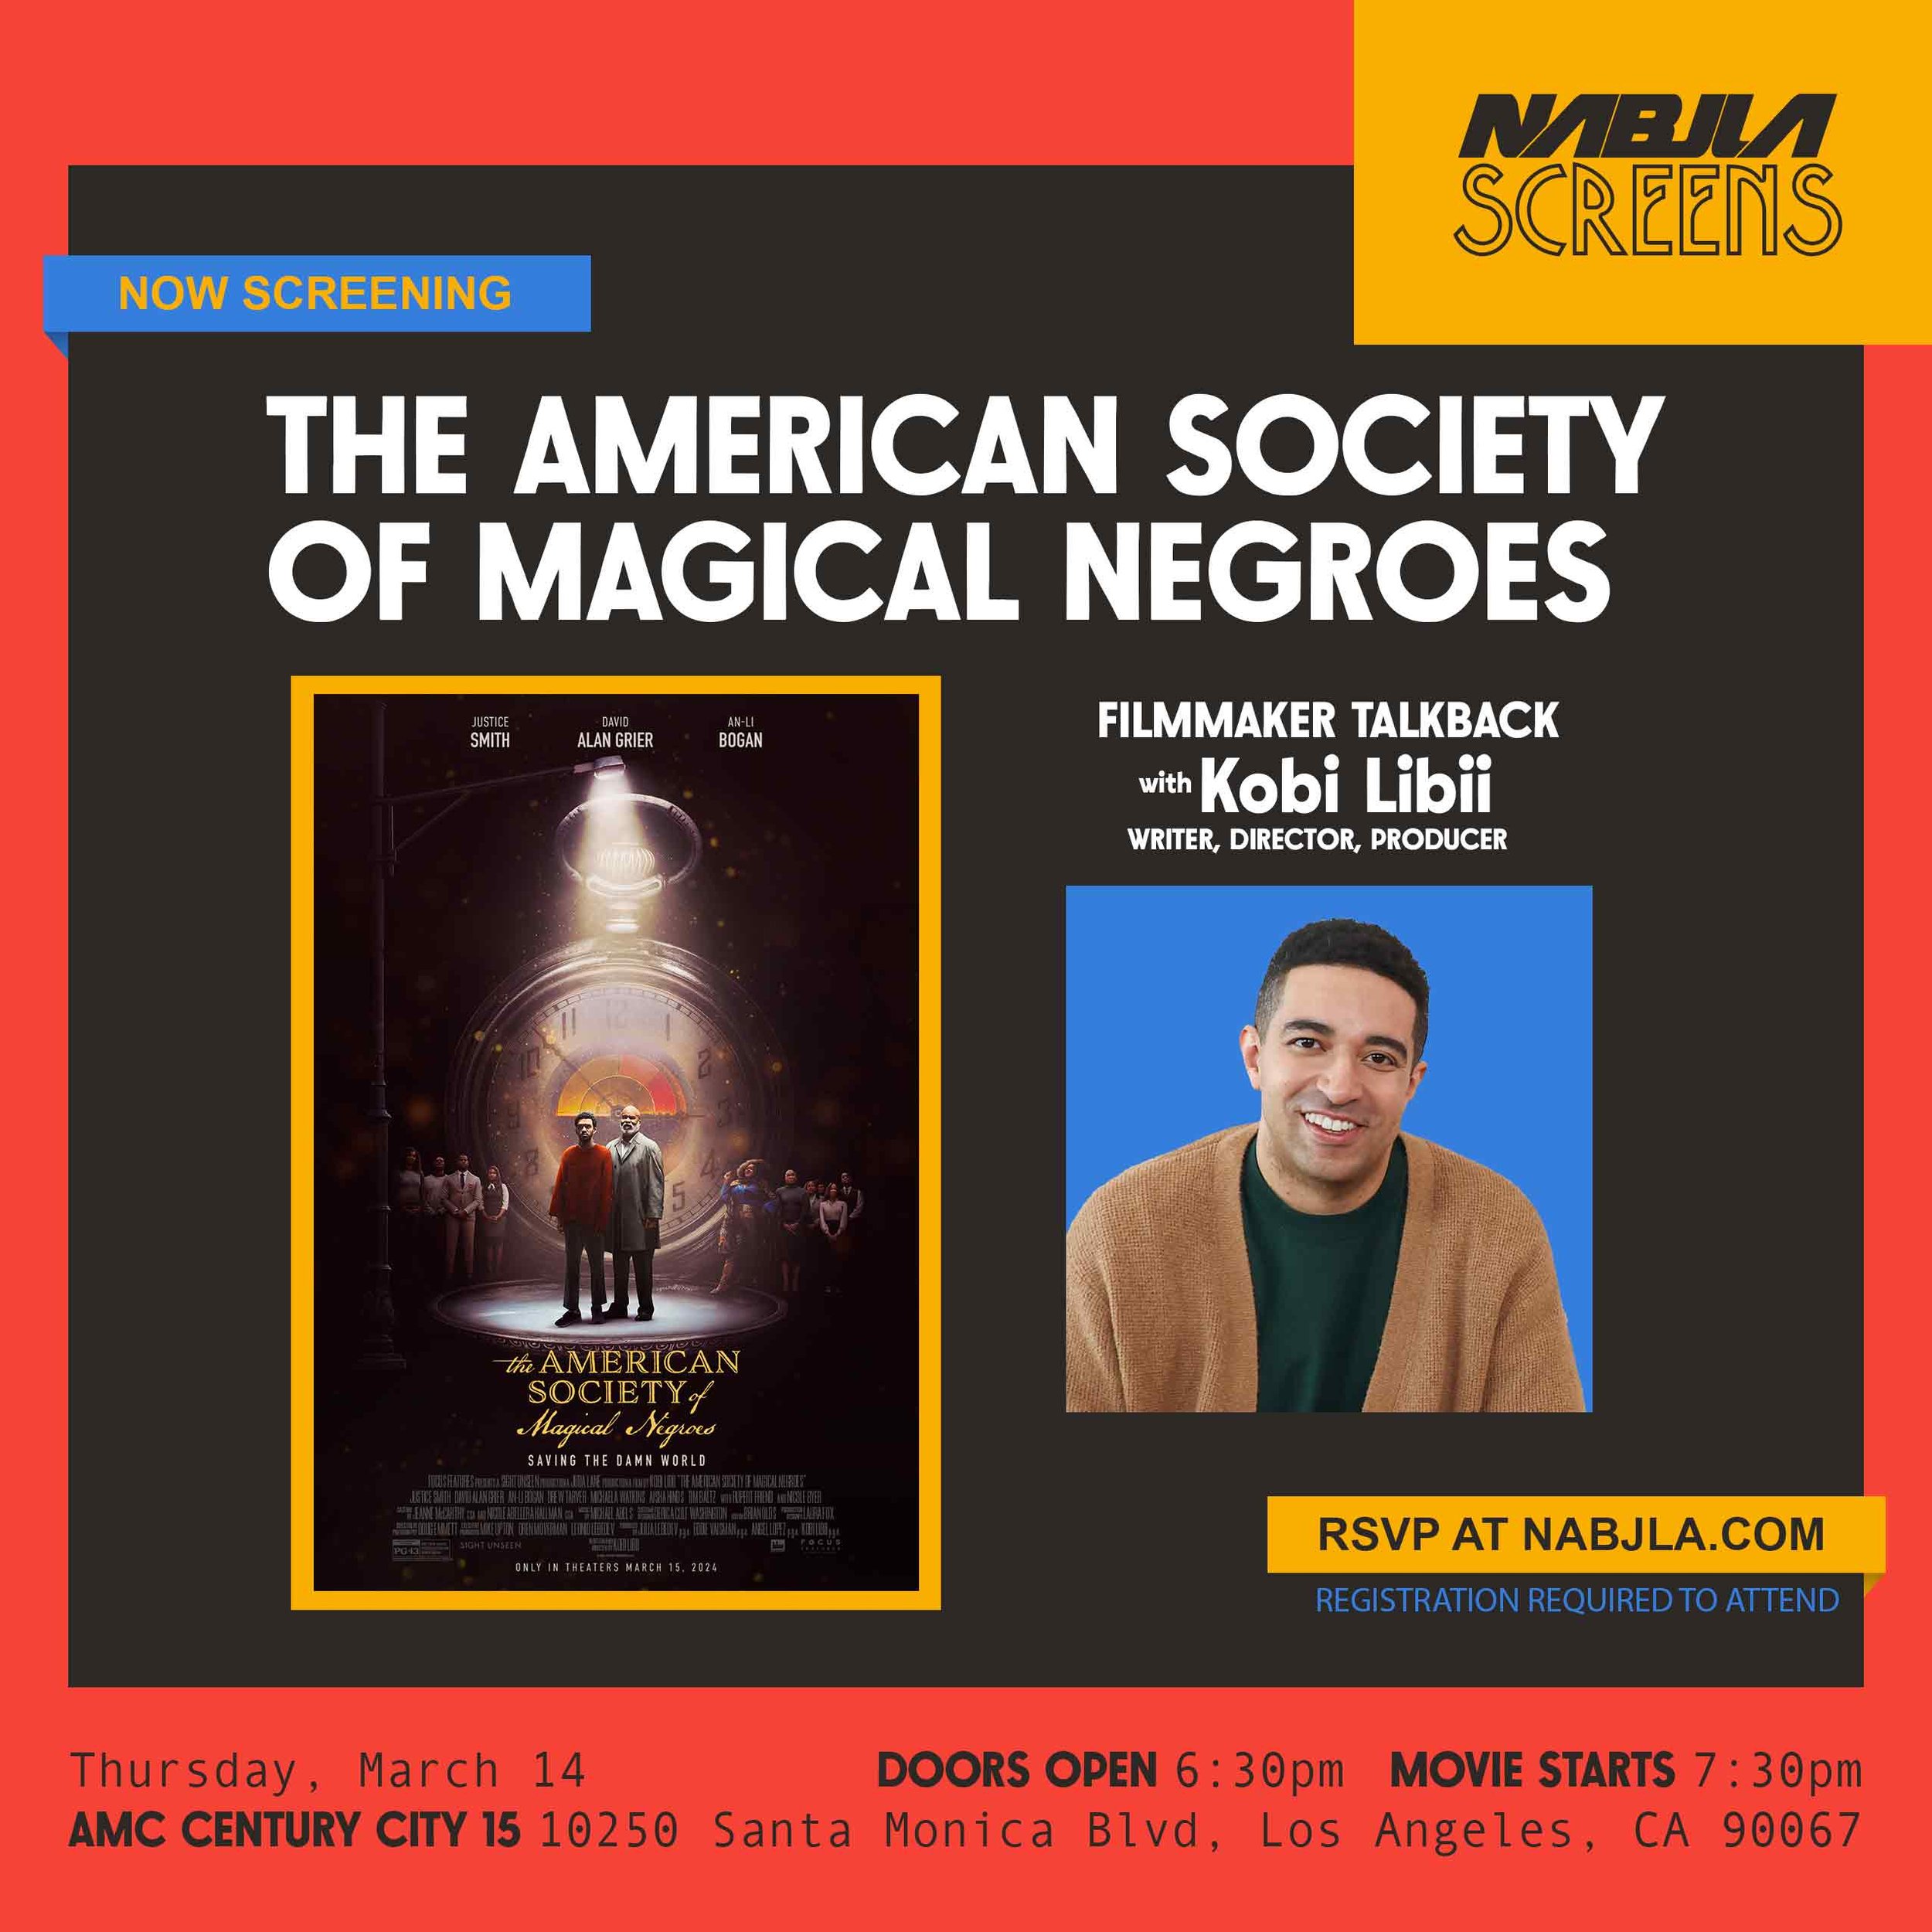 NABJLA Screens Promo The American Society of Magical Negroes.jpg